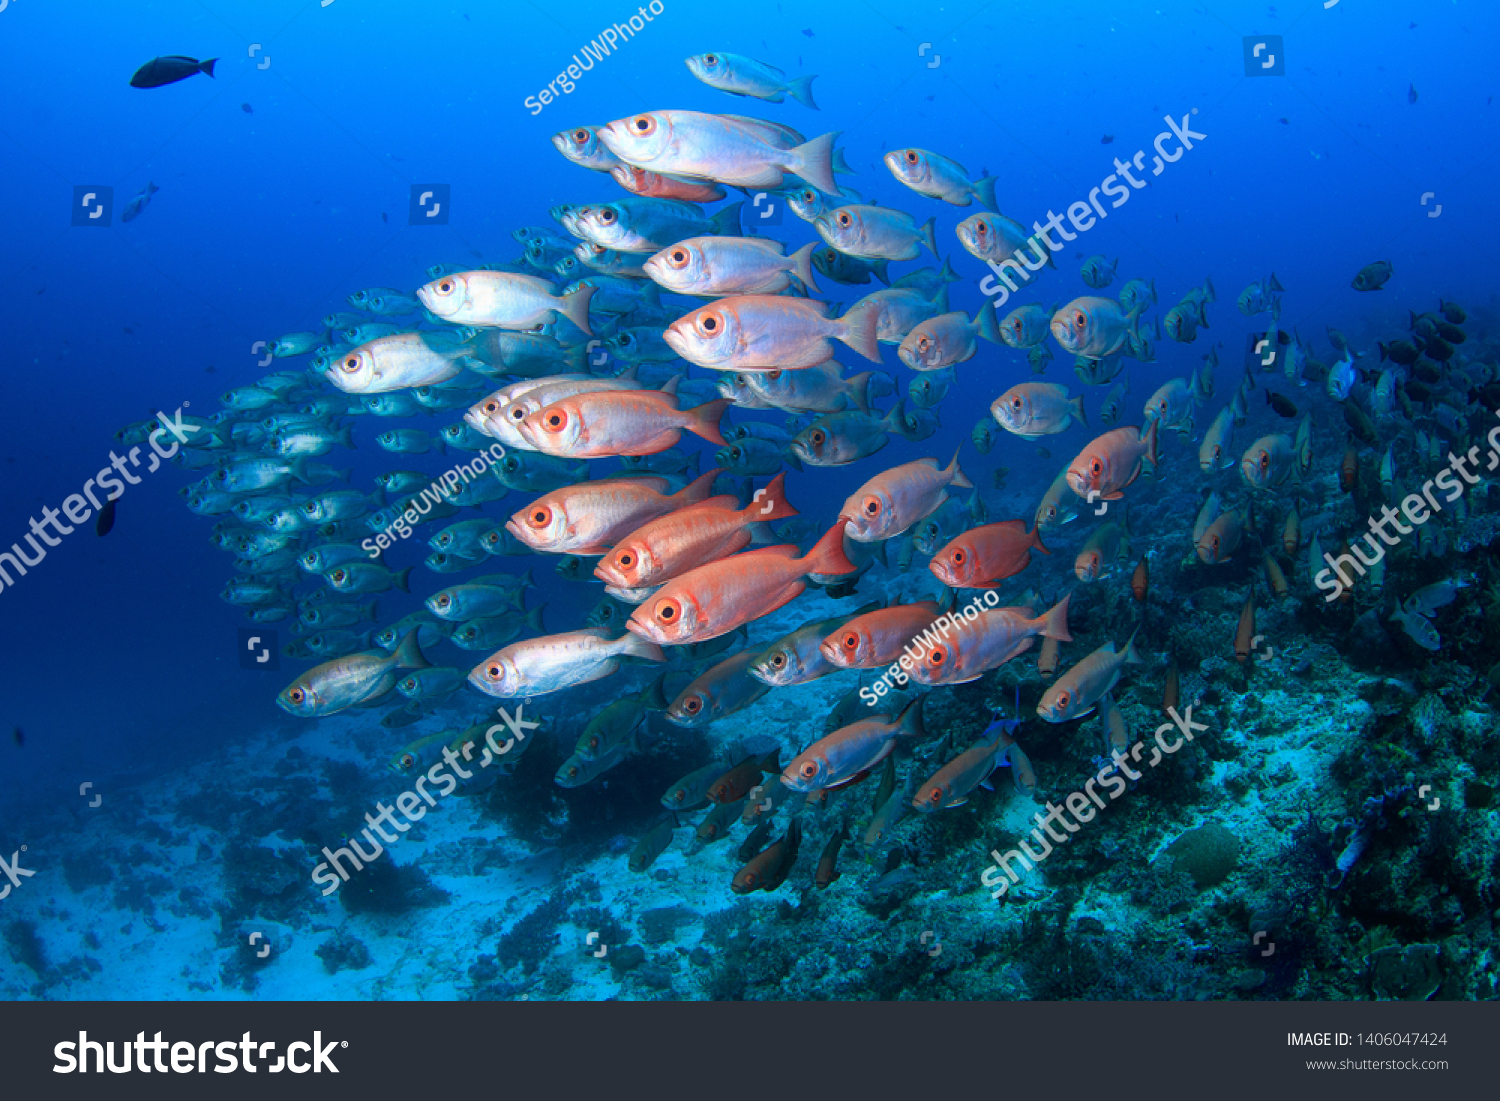 A shoal of schooling red silver big eye fish in a dense formation in the clear blue water on a scuba dive in Raja Ampat, Indonesia ... diving holidays at its best #1406047424